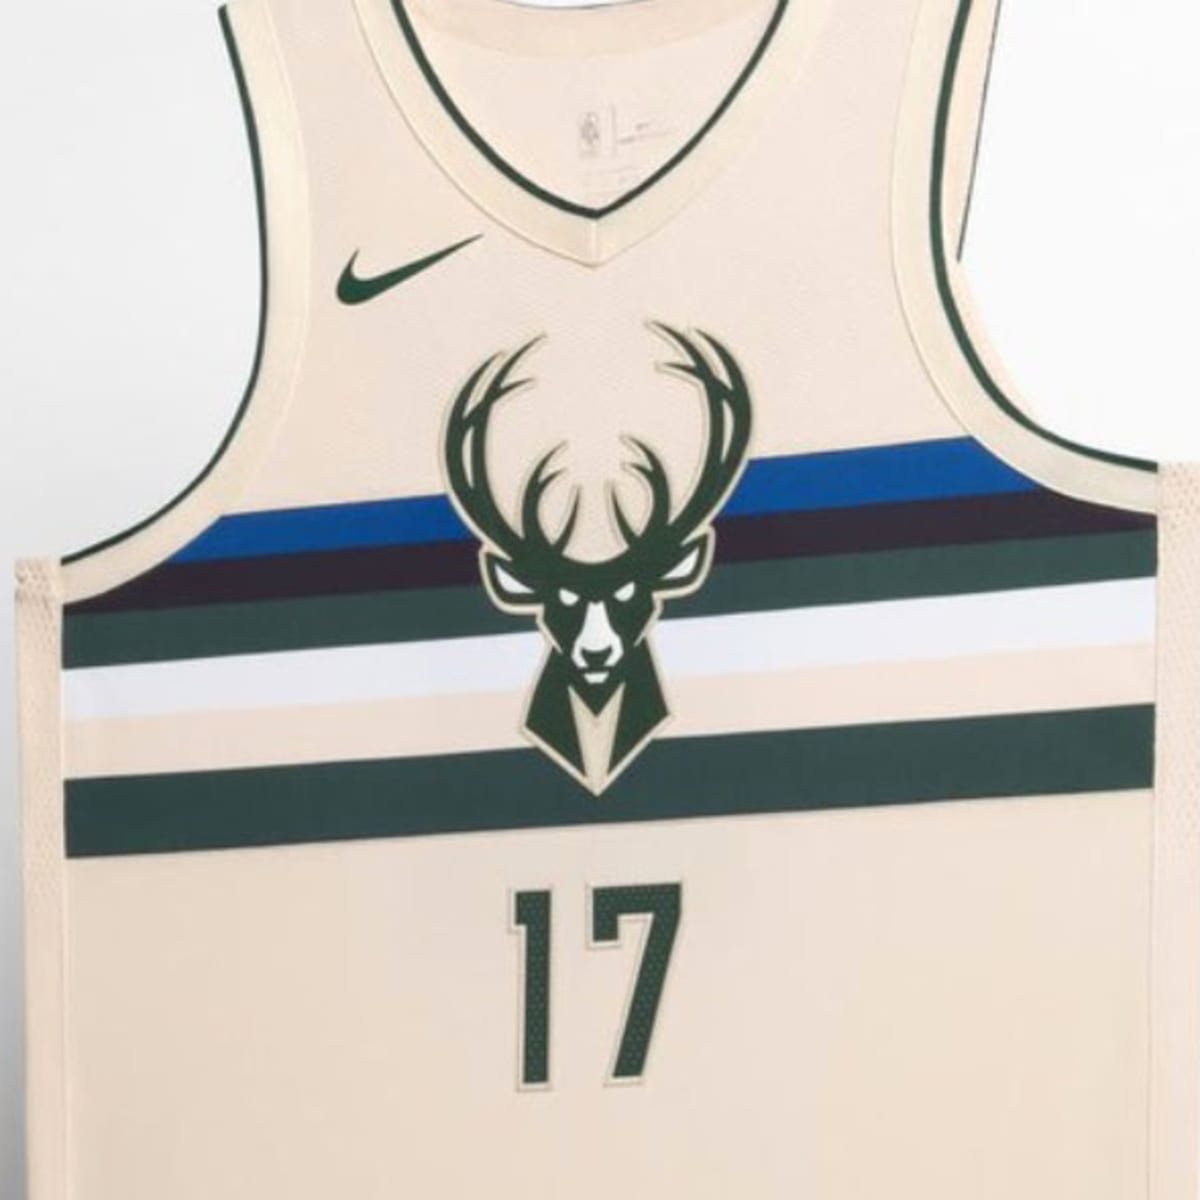 New NBA city uniforms: A Q&A with the designer and what to look